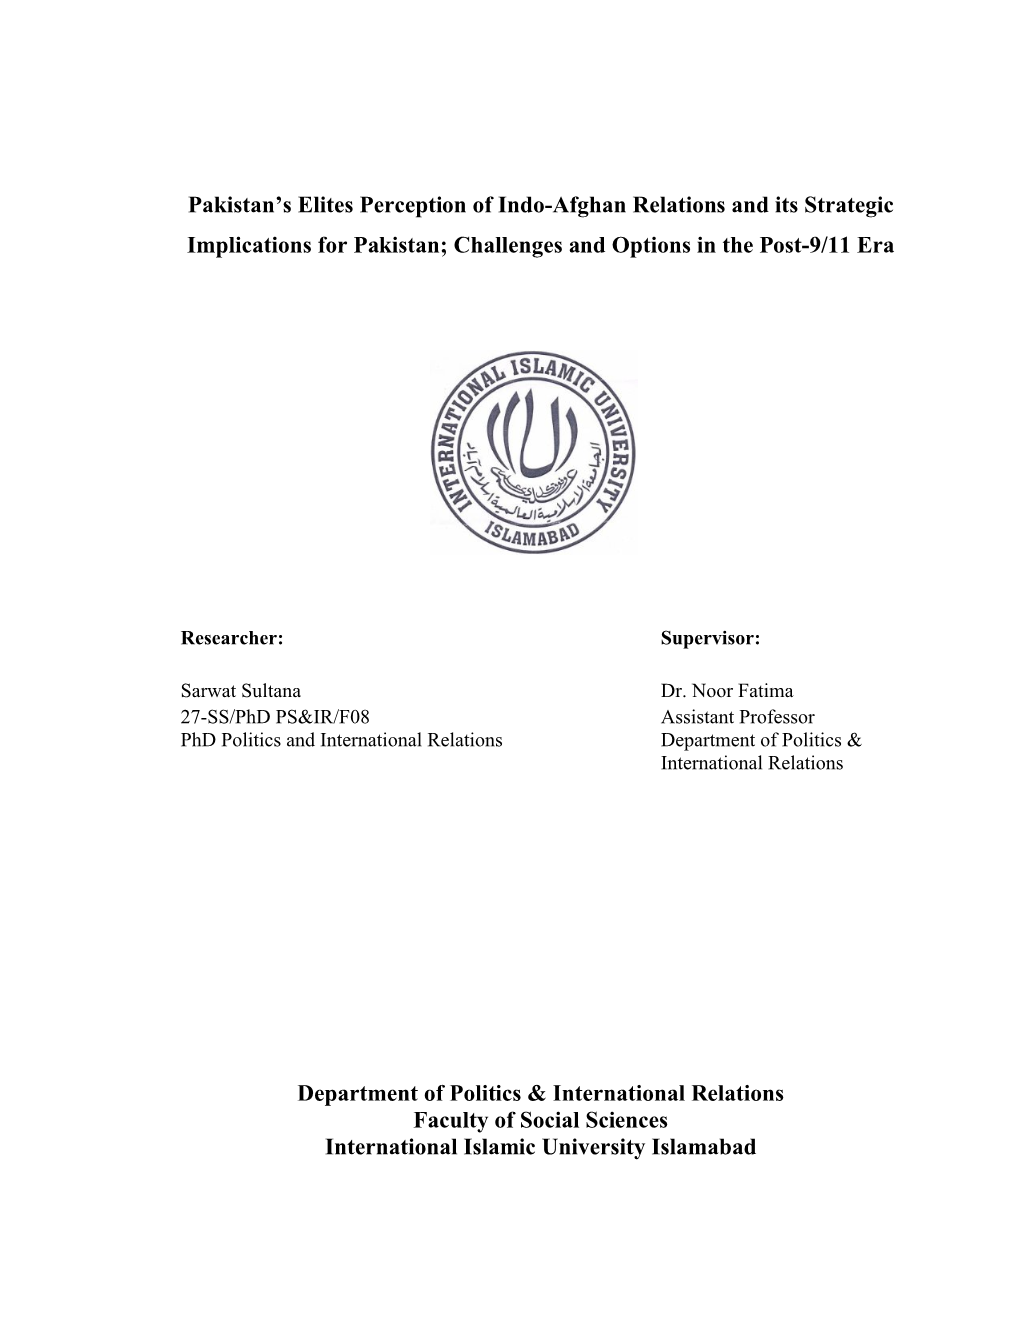 Pakistan's Elites Perception of Indo-Afghan Relations and Its